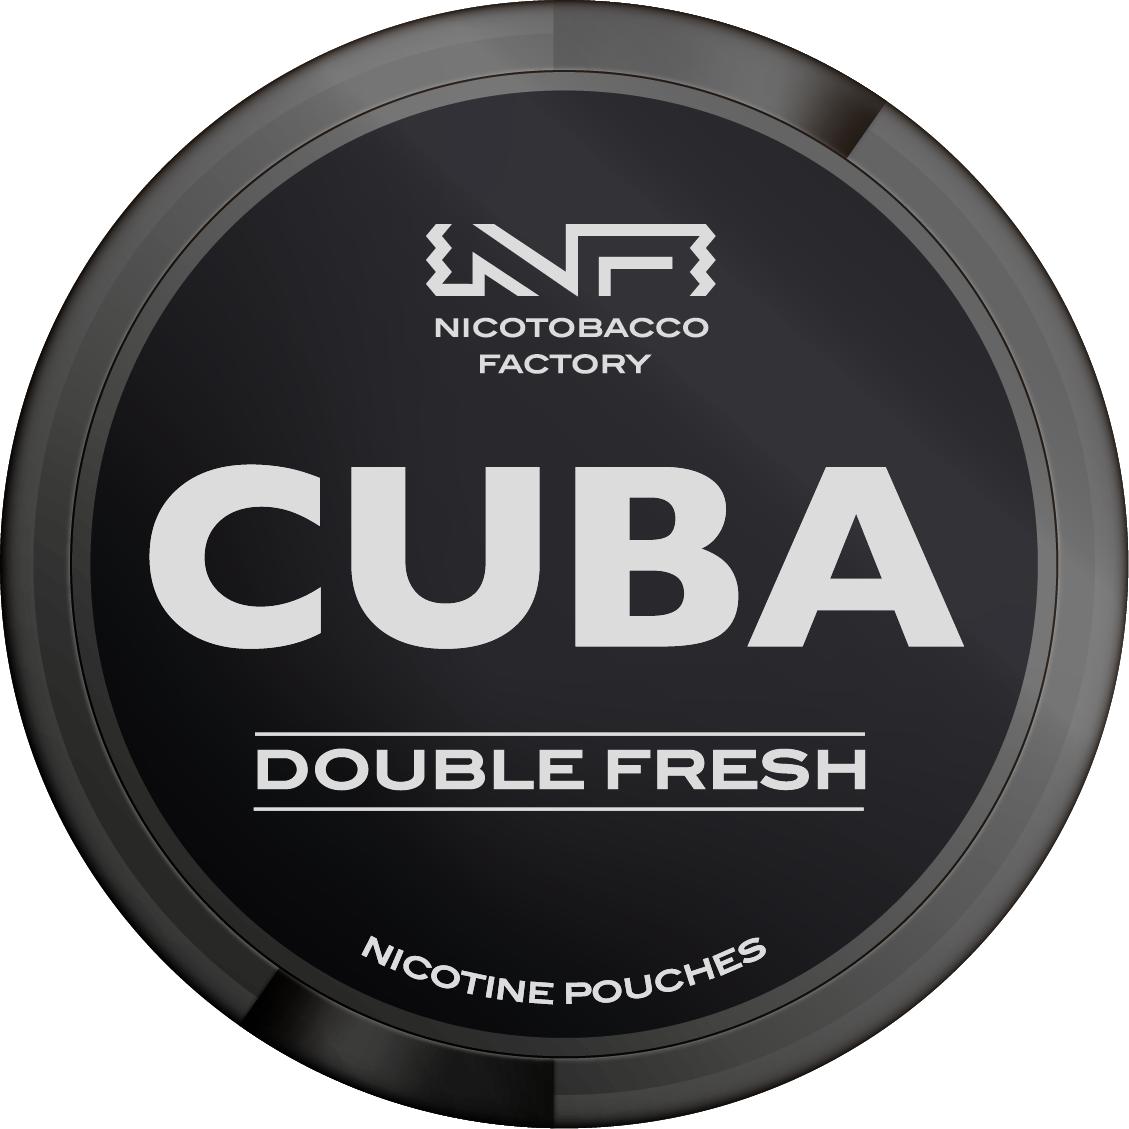 Black Double Fresh Nicotine Pouches By Cuba